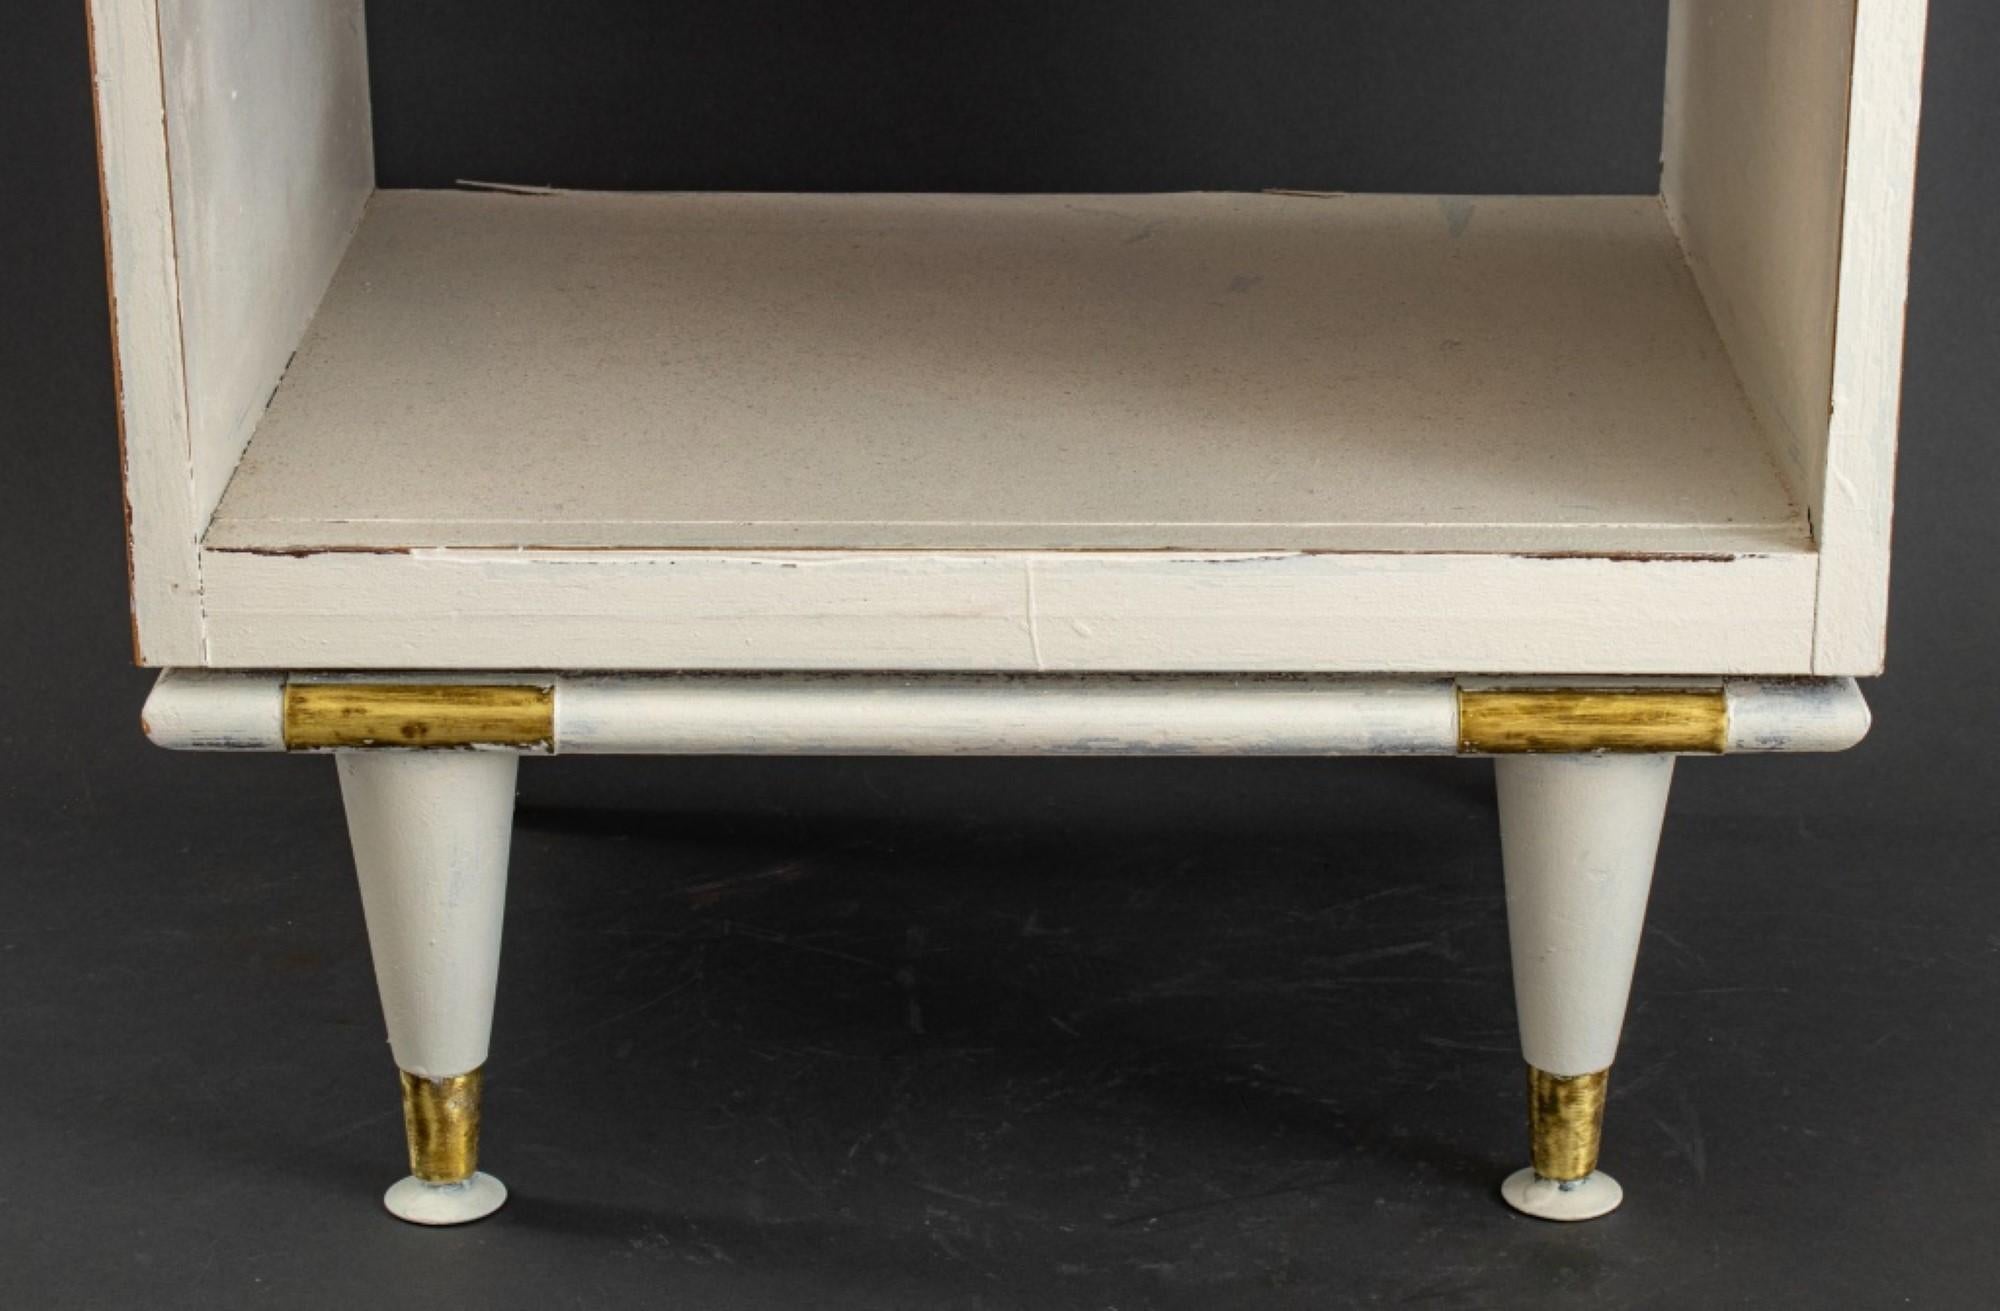 
The dimensions for the Mid-Century Modern white painted wood nightstand are as follows:

Height: 27